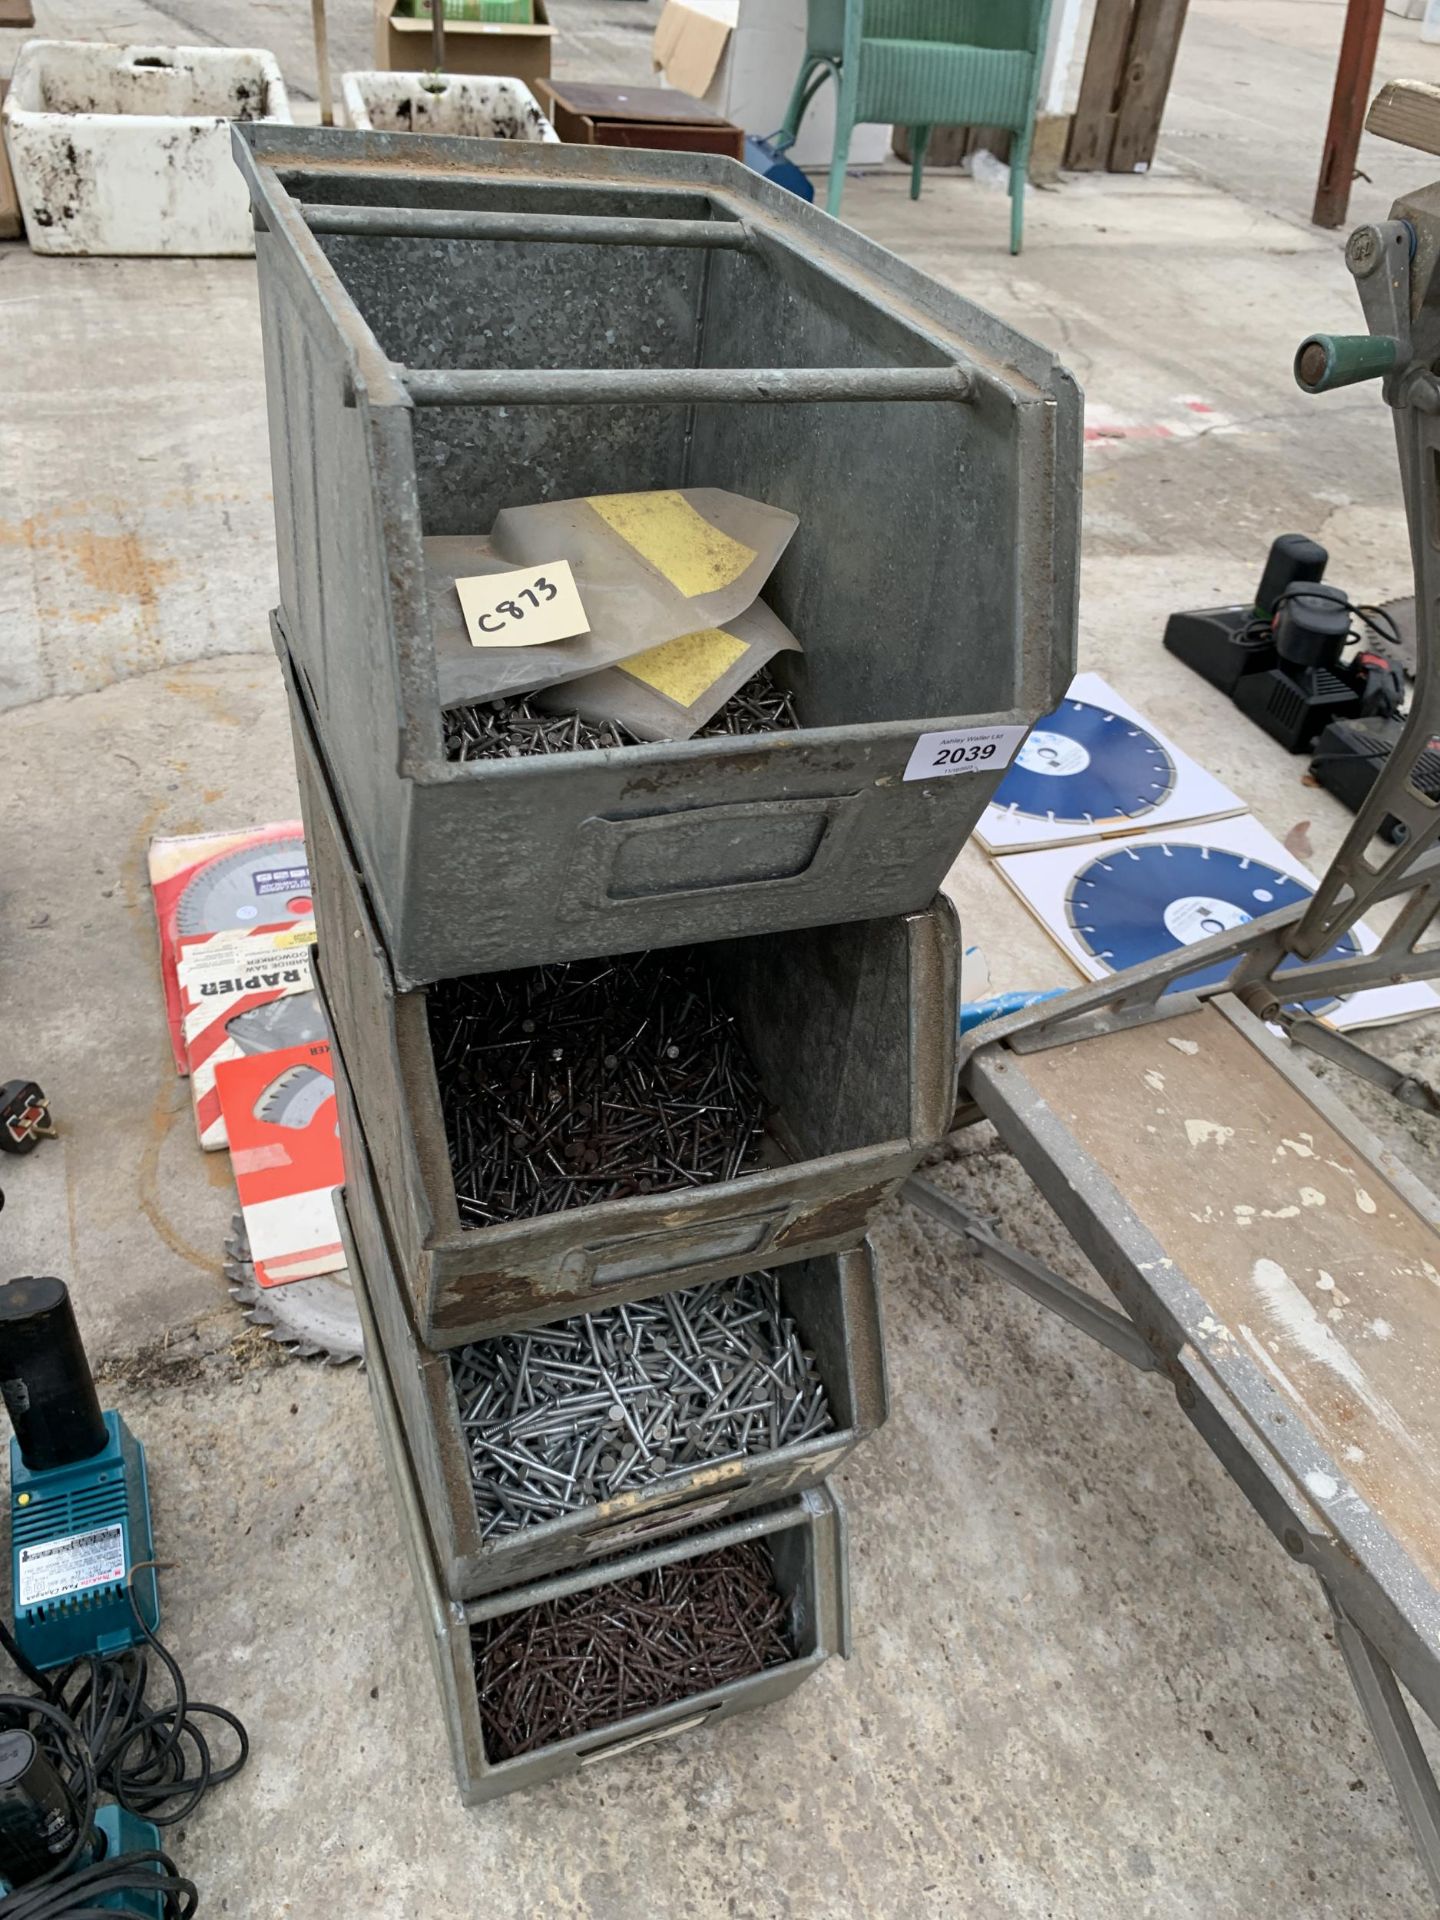 FOUR GALVANISED STORAGE BINS CONTAINING A LARGE QUANTITY OF NAILS